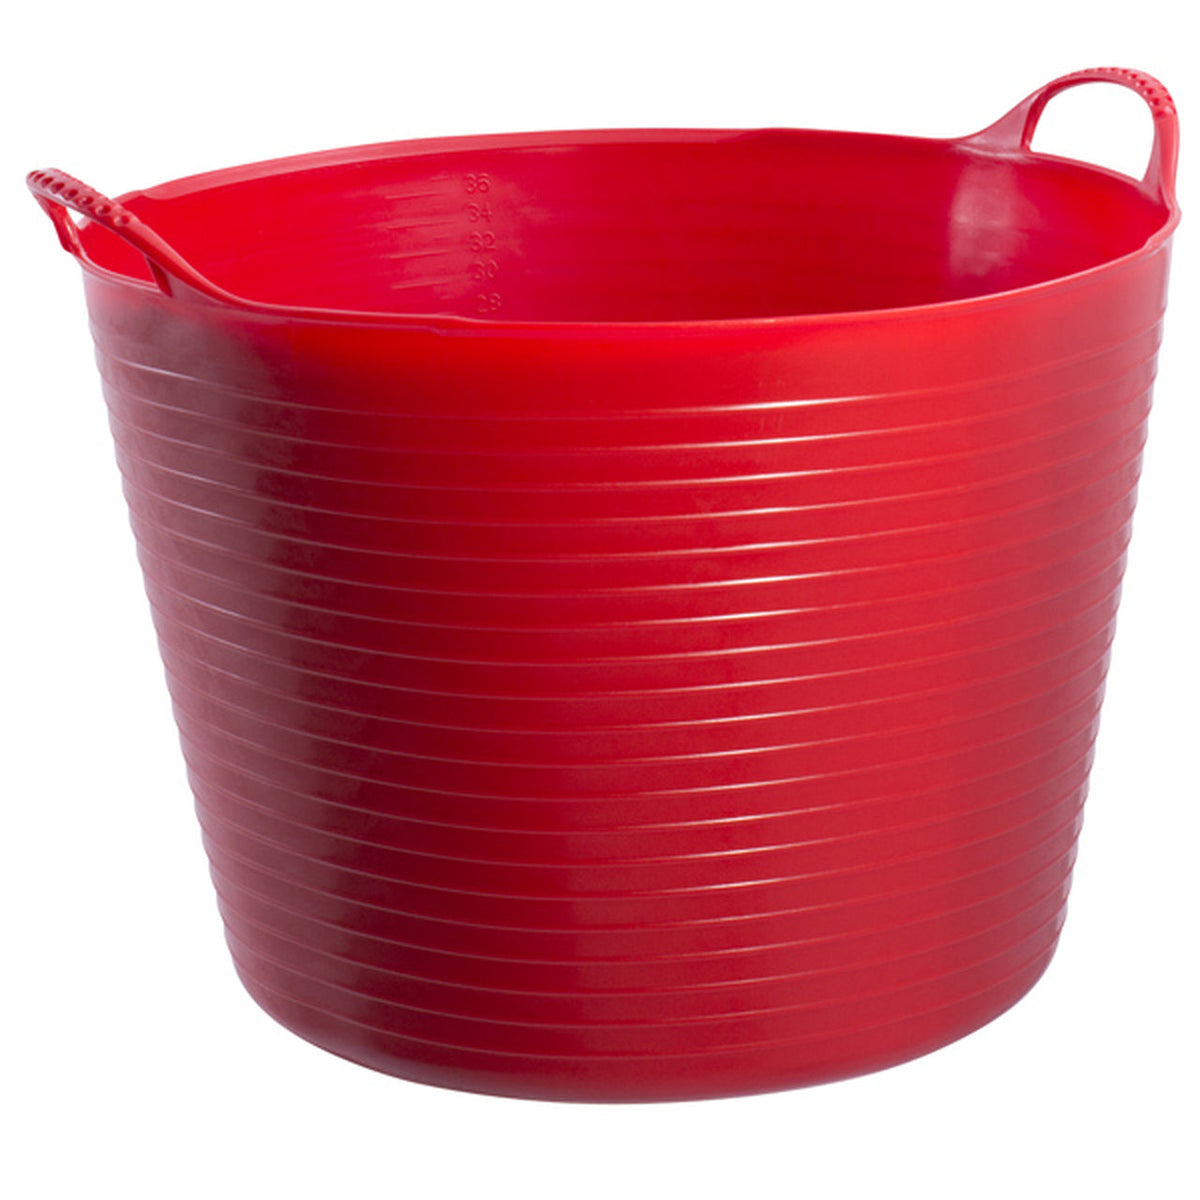 Large red bucket with measurements on inside and two curved handles.